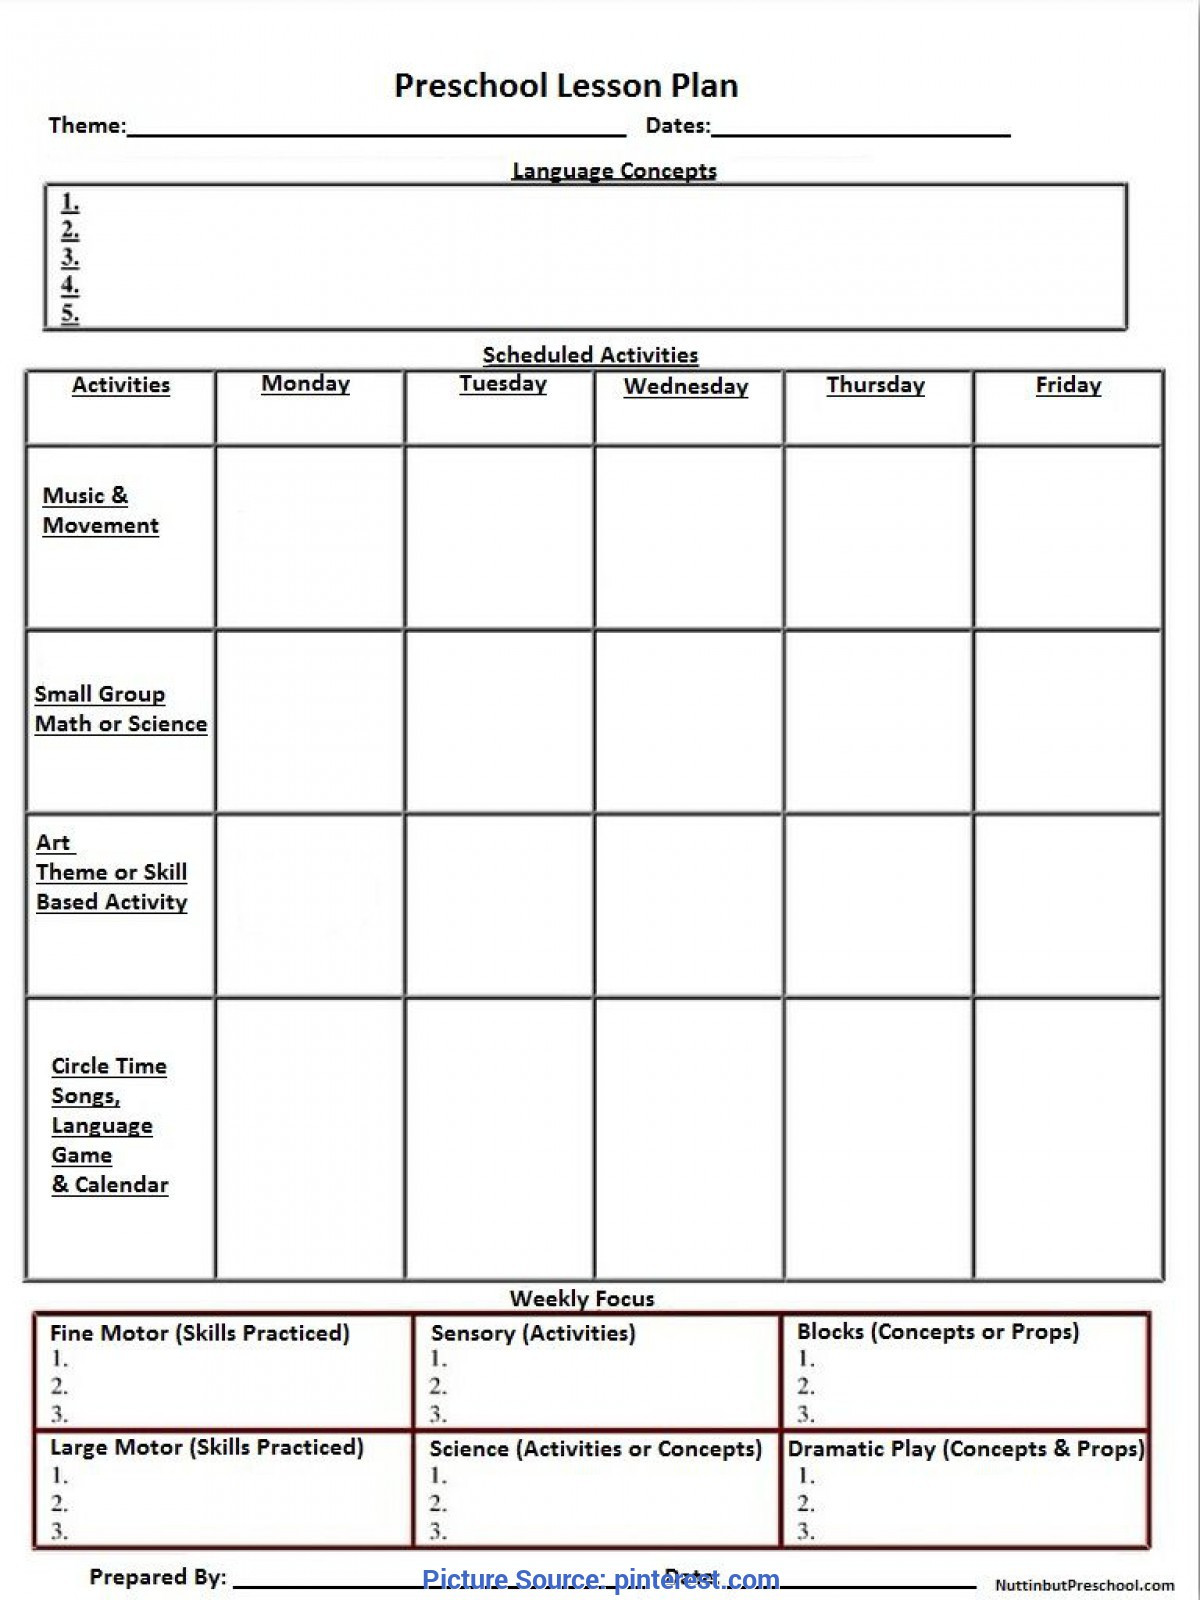 Free Preschool Lesson Plan Template Business Plan Template for Child Care Center toddler